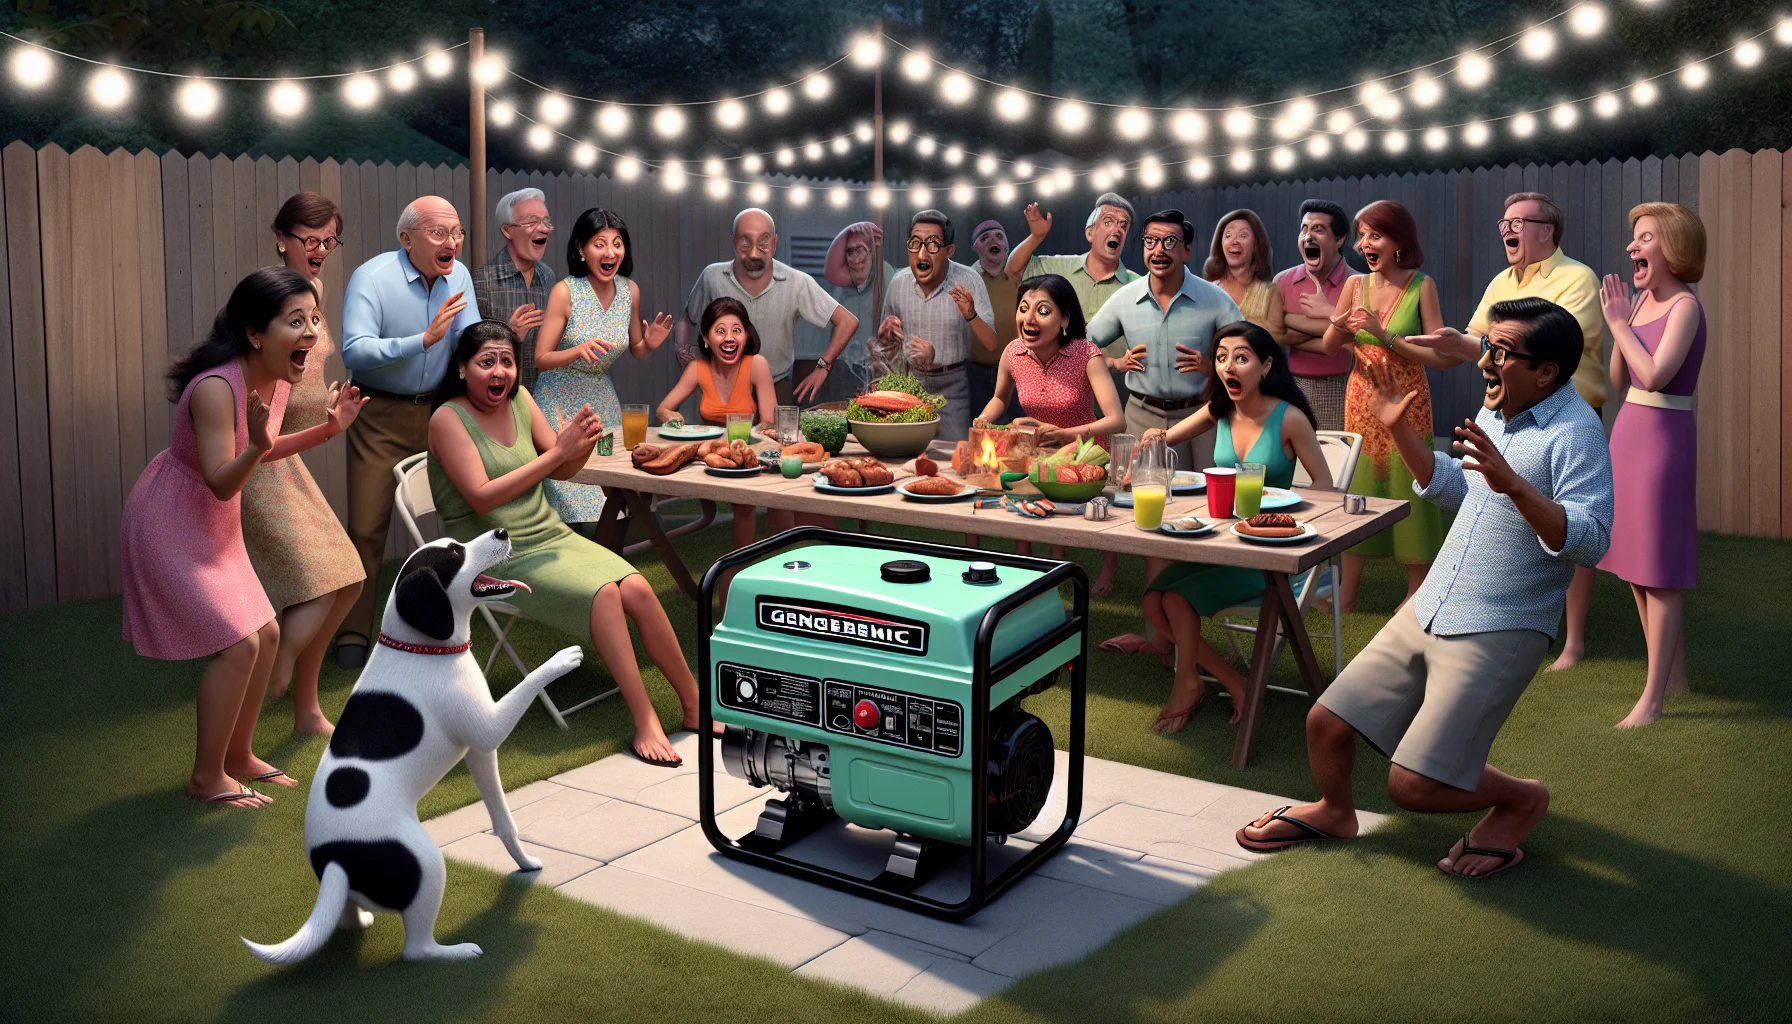 Imagine a humorous scene of a backyard barbecue party where the power has gone out. The scene portrays a dog accidentally starting up a generic, yet well-built and sleek, mint green generator, saving the day and eliciting hearty laughter from a diverse group of South Asian women and White men gathered around. The carnivalesque happenstance continues with the twinkle lights flickering back to life, illuminating their surprised expressions and bringing a whimsical atmosphere to the entire party. This light-hearted scene suggests the simple and accessible nature of electricity generation.